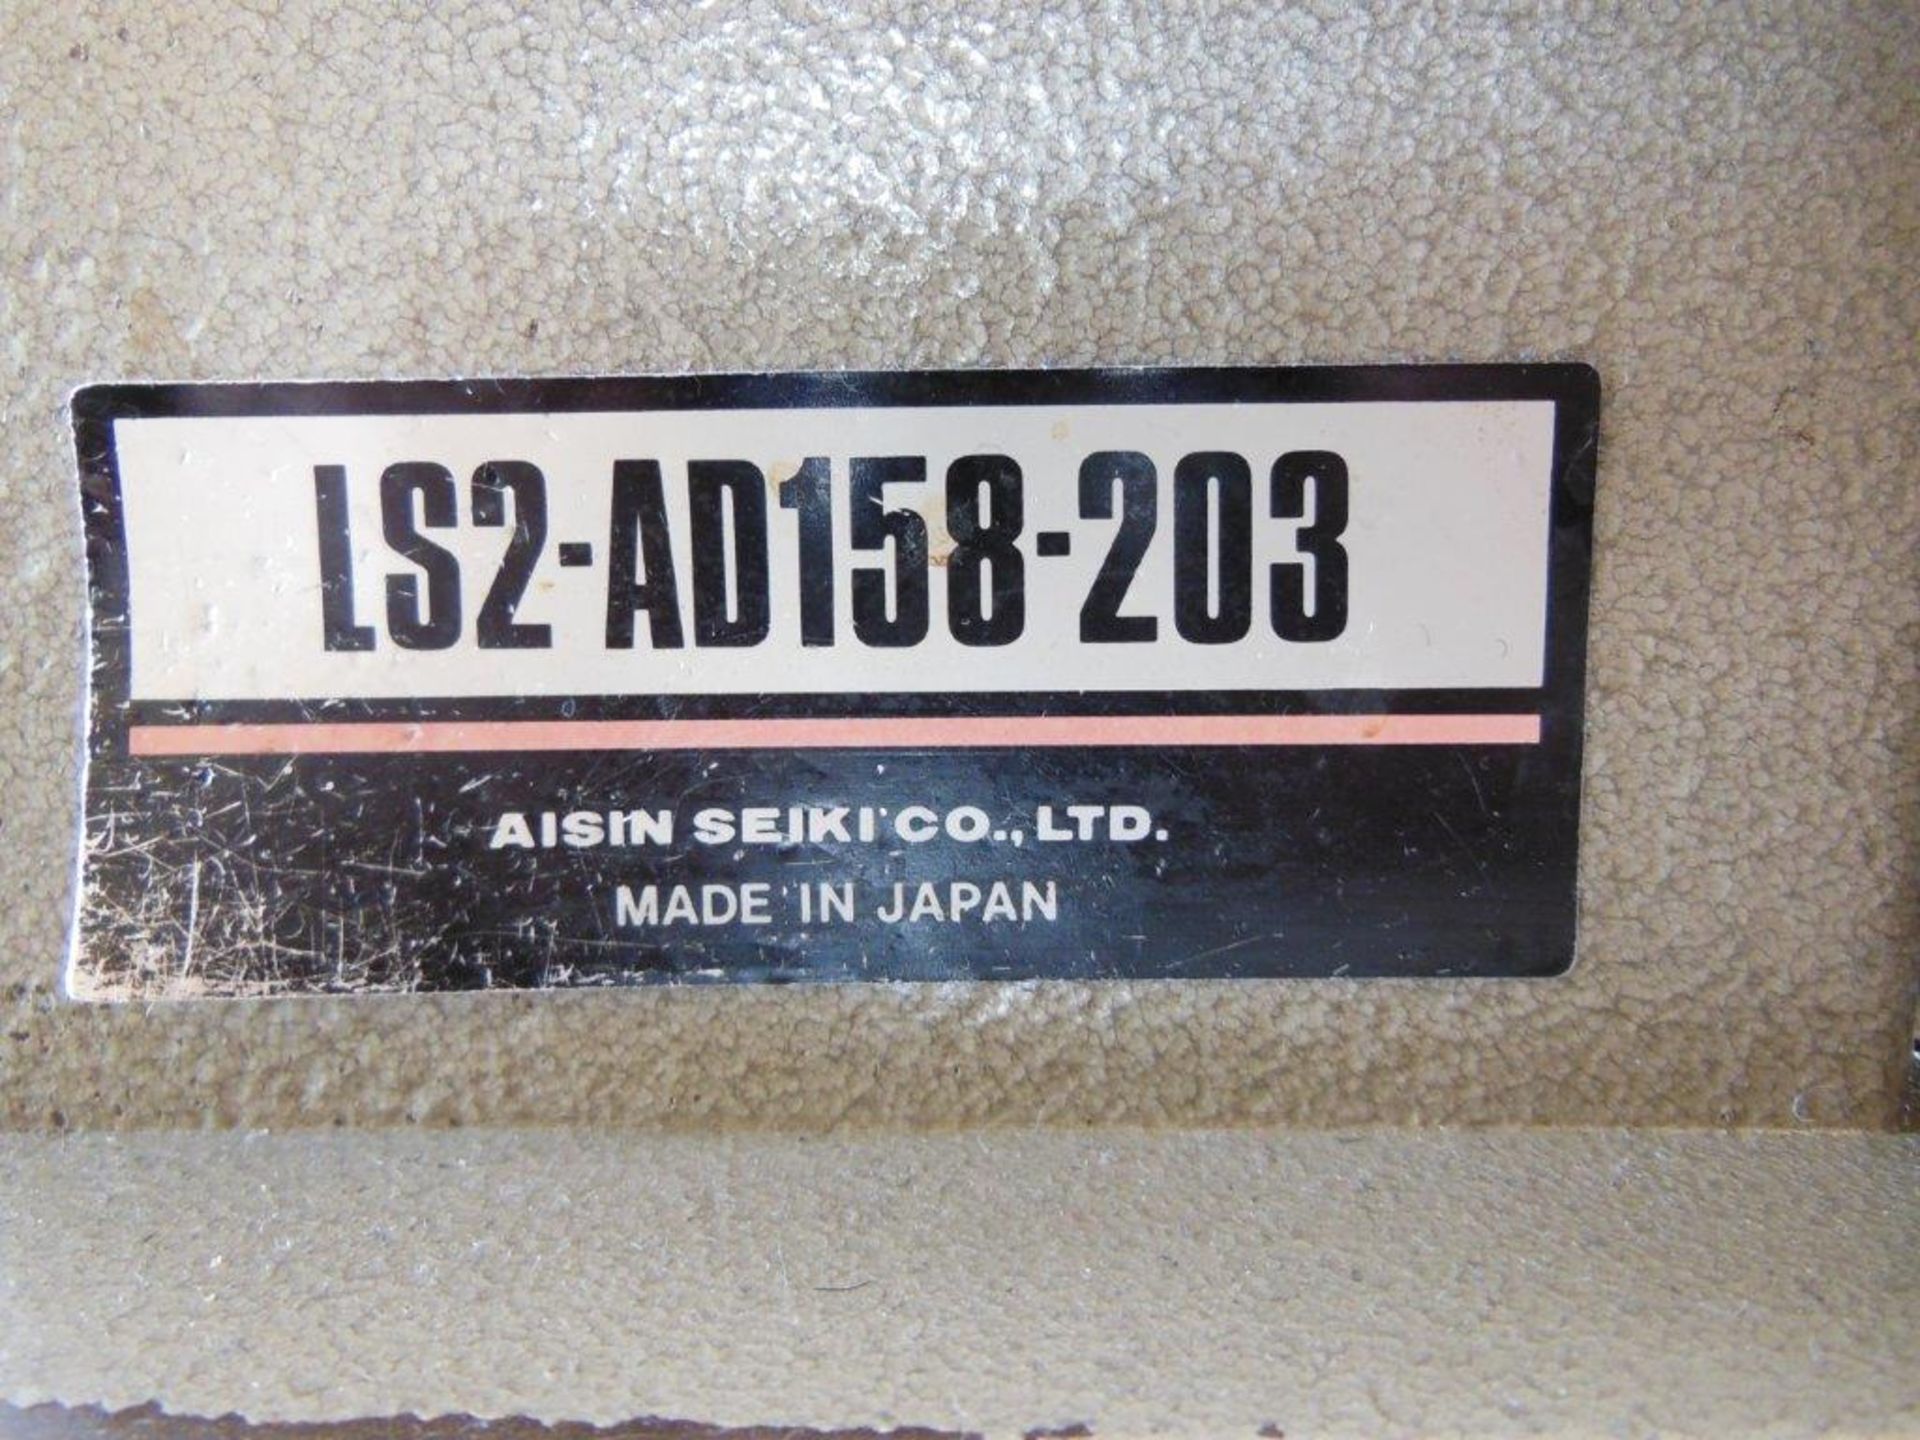 Aisin Seiki Ltd LS2-AD158-203 industrial flatbed sewing machine, three phase. NB: this item has no - Image 4 of 4